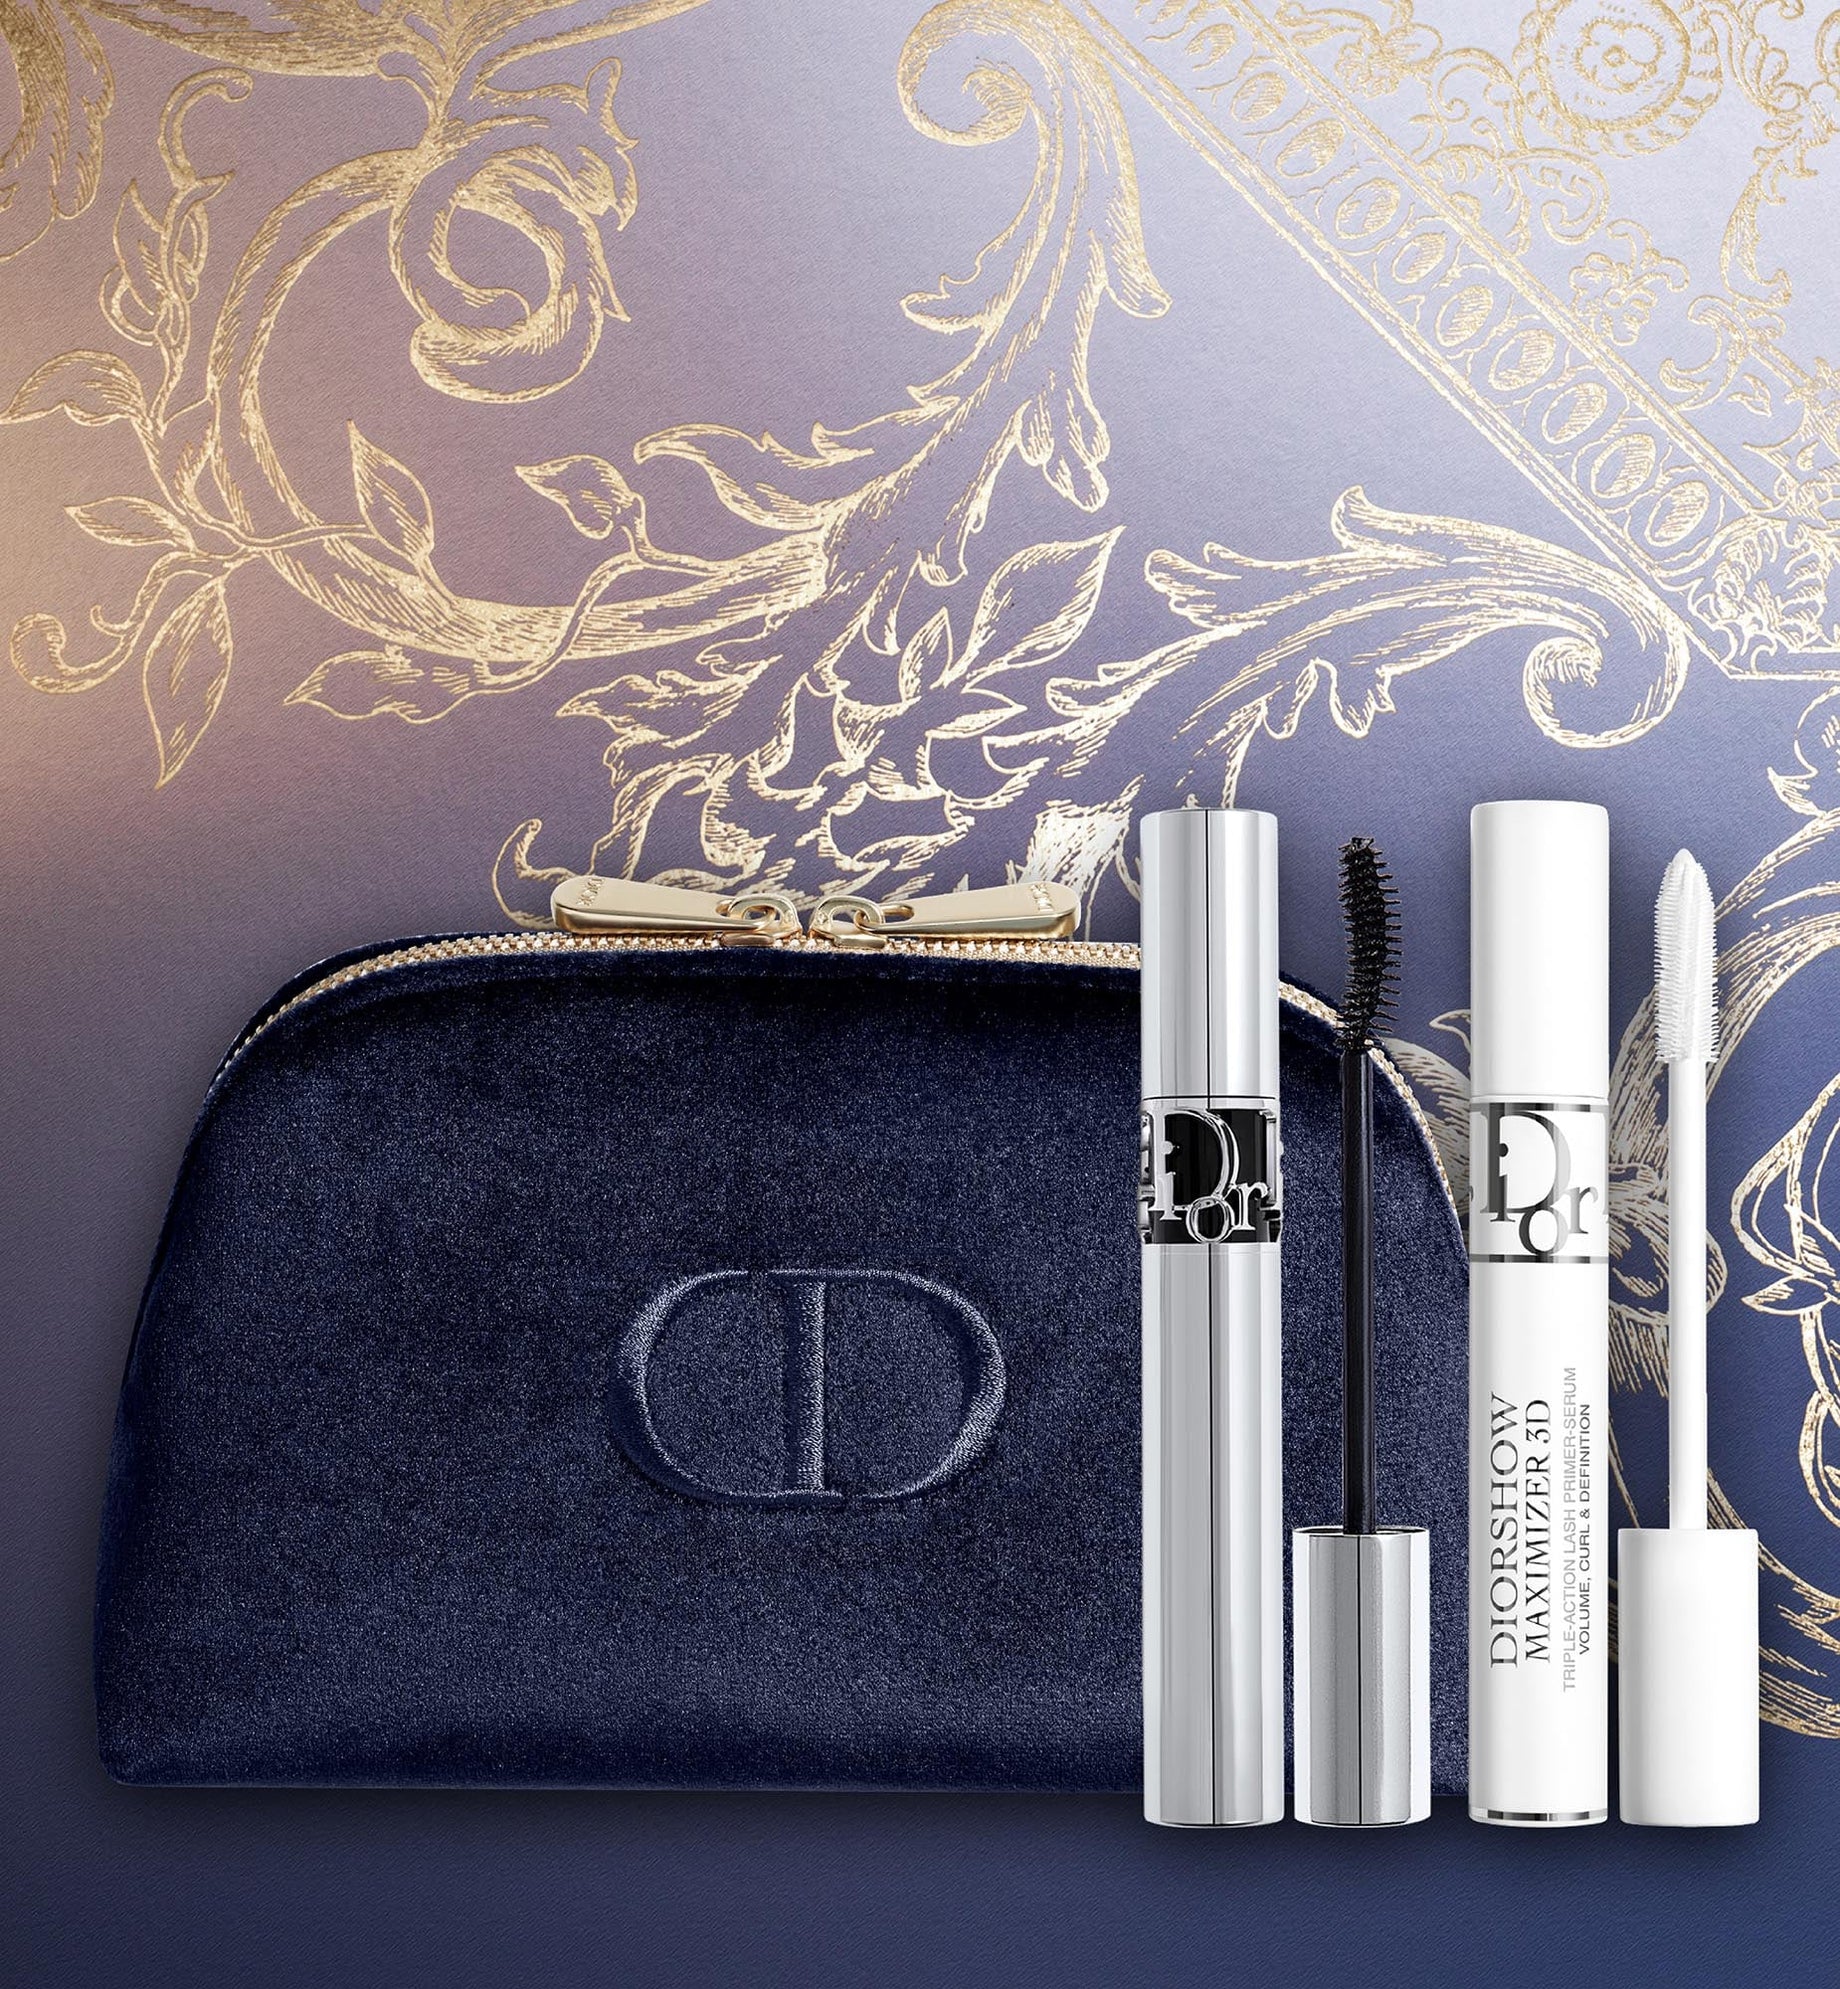 DIORSHOW ICONIC OVERCURL SET - LIMITED EDITION